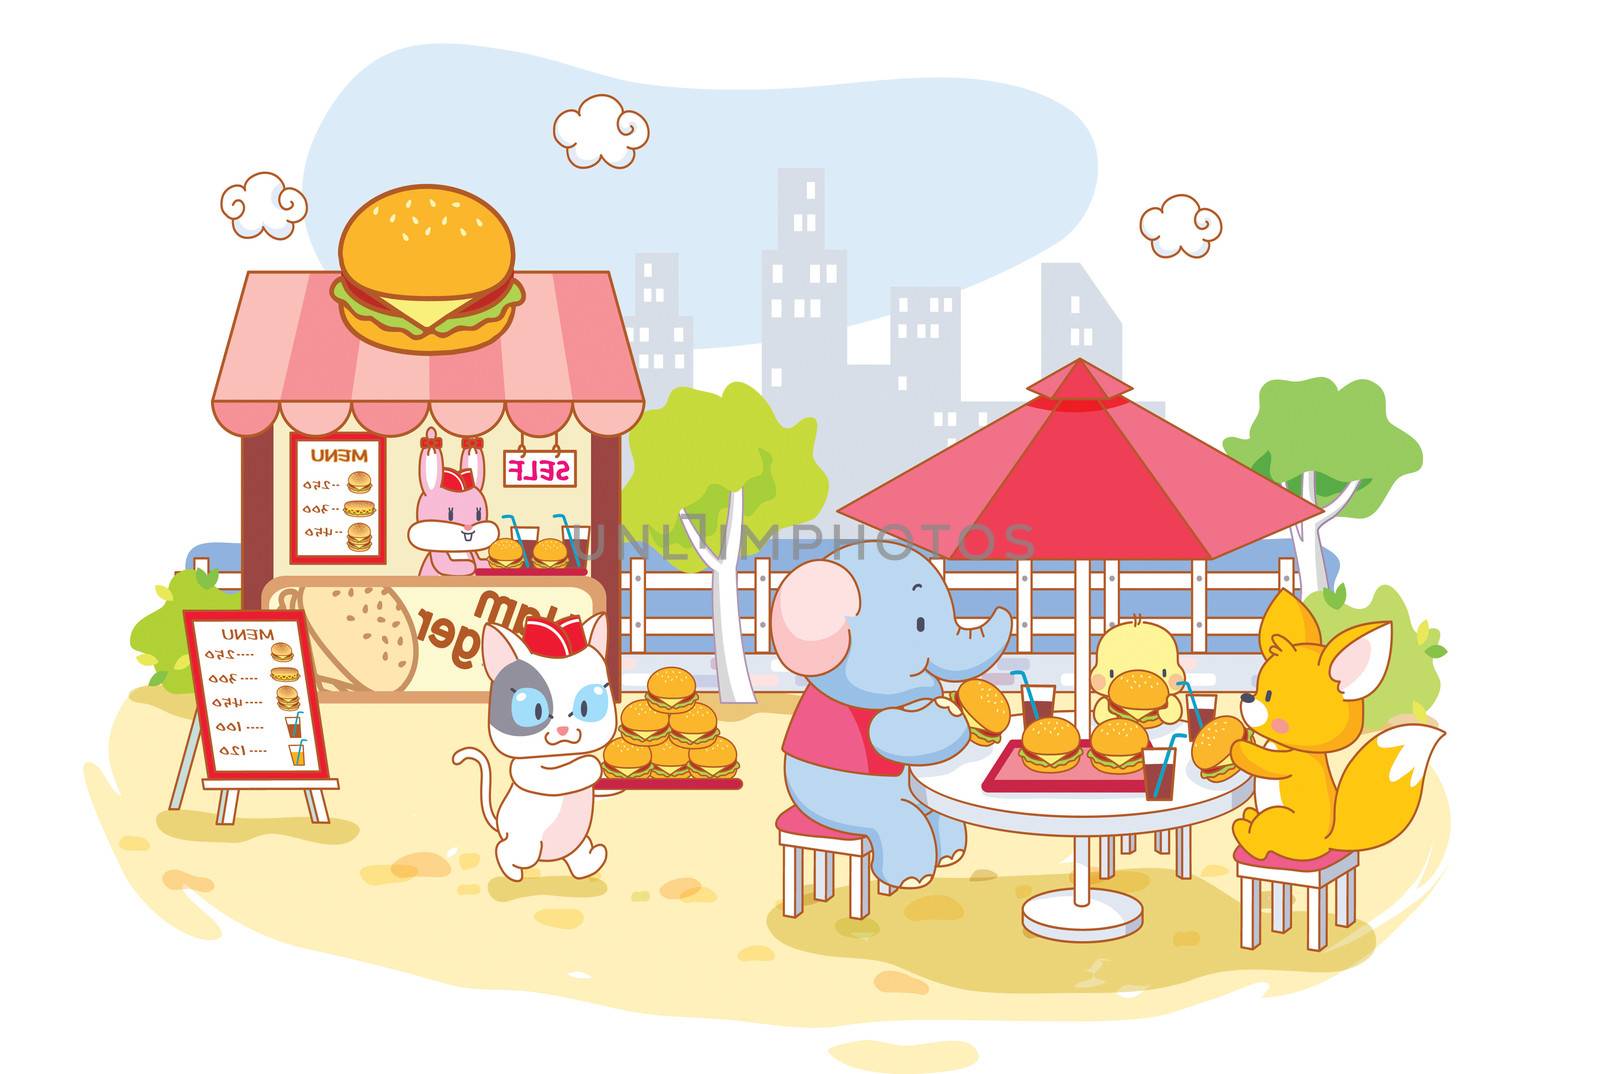 party animals cartoon elephant,cat,squirrel and chicks in summer